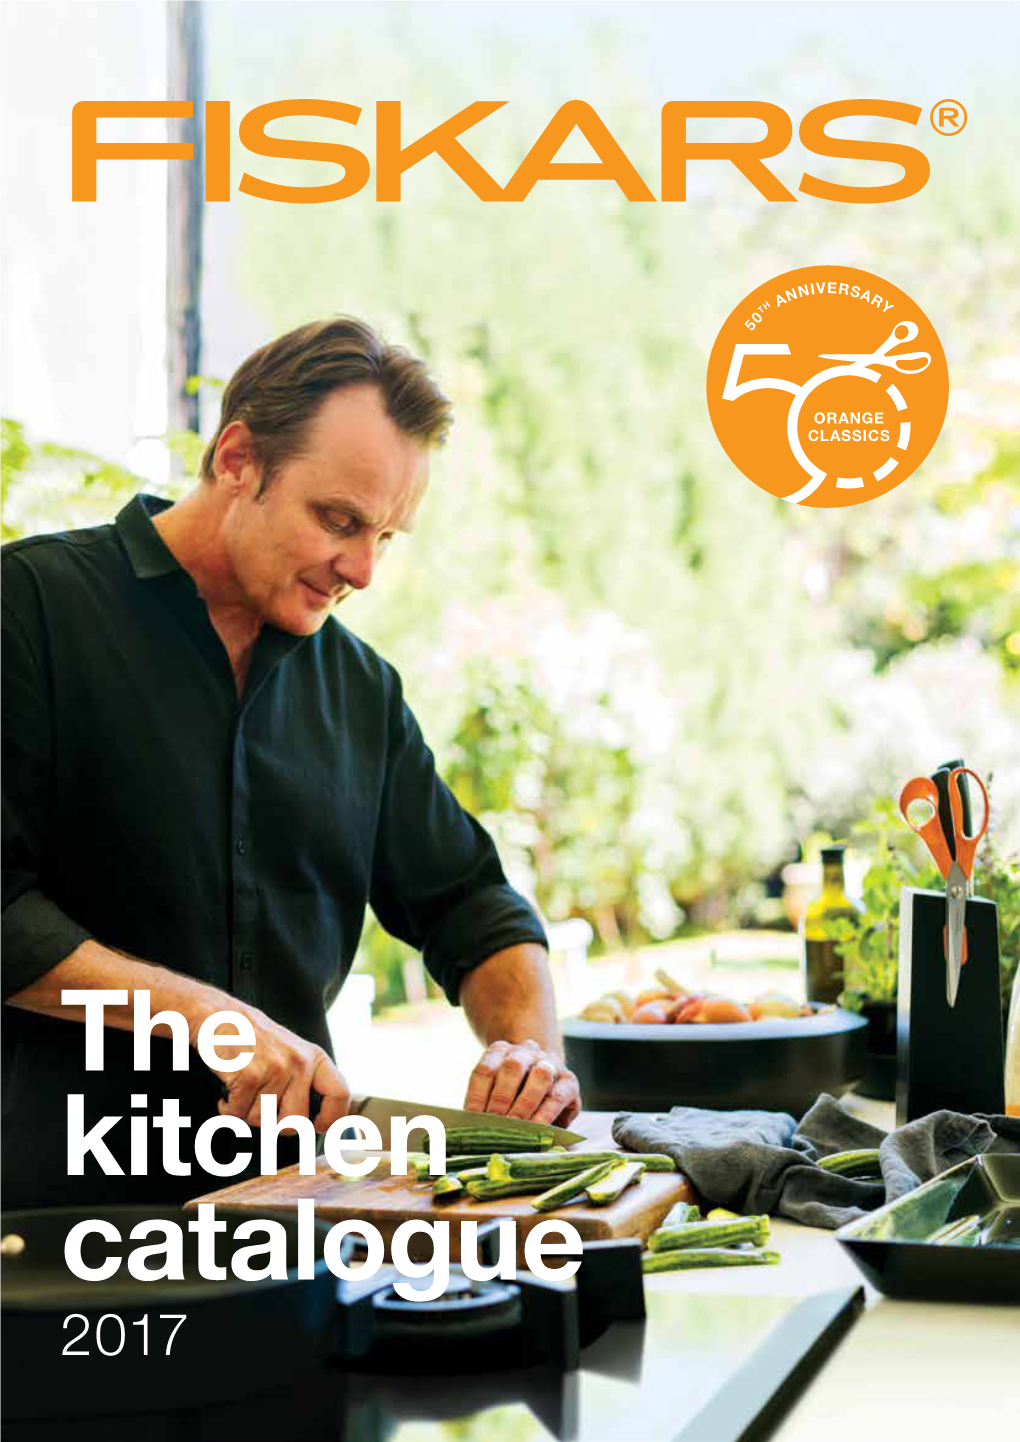 The Kitchen Catalogue 2017 Over 365 Years of History Are Proof of Our Commitment to Quality